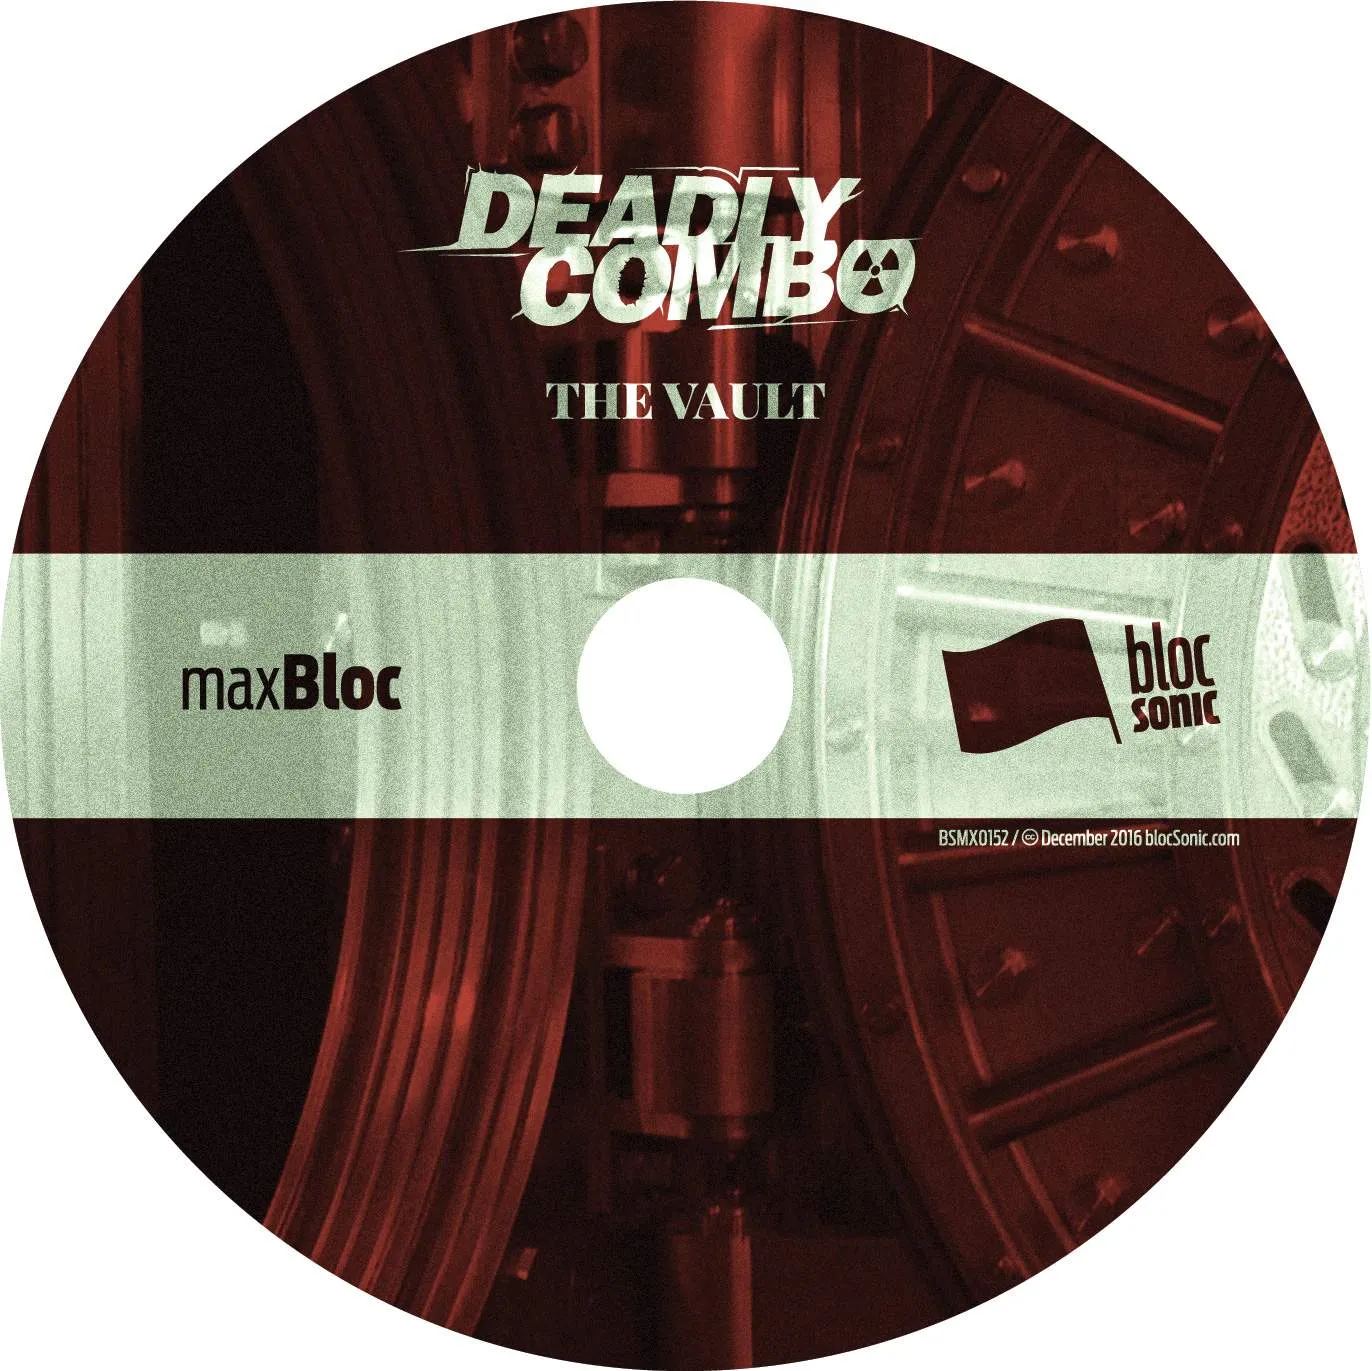 Album disc for “The Vault” by Deadly Combo